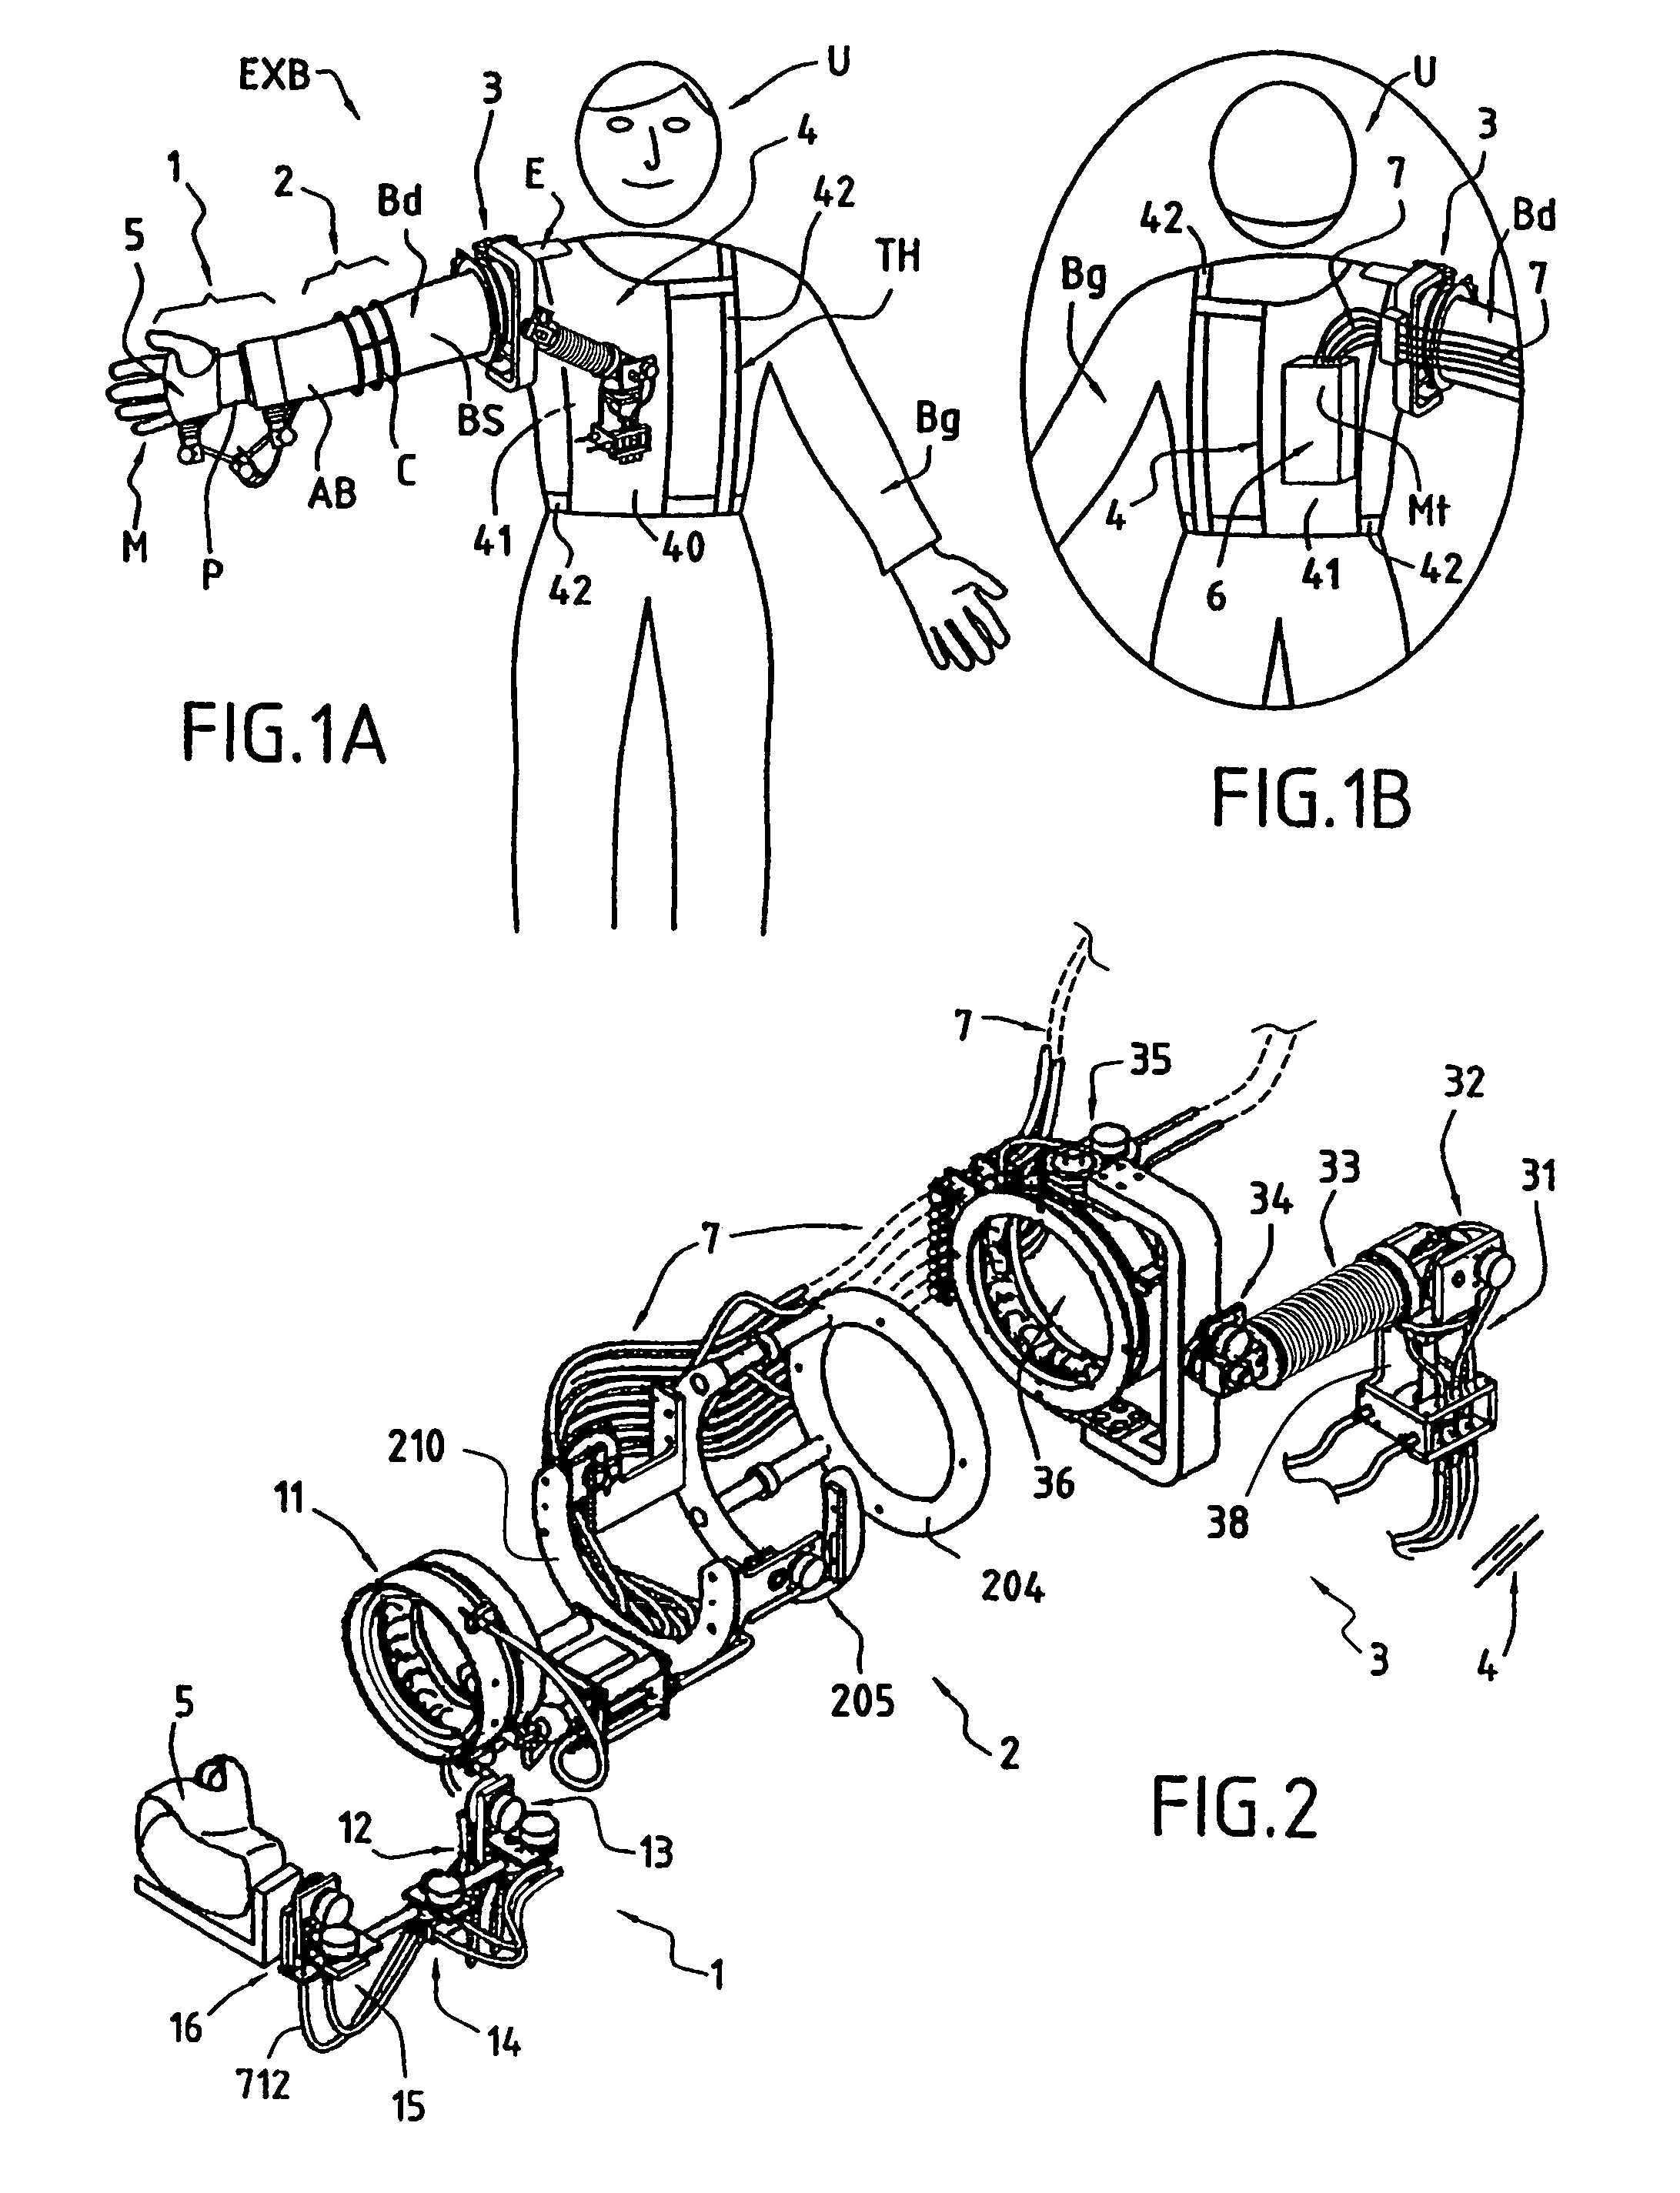 Exoskeleton for the human arm, in particular for space applications